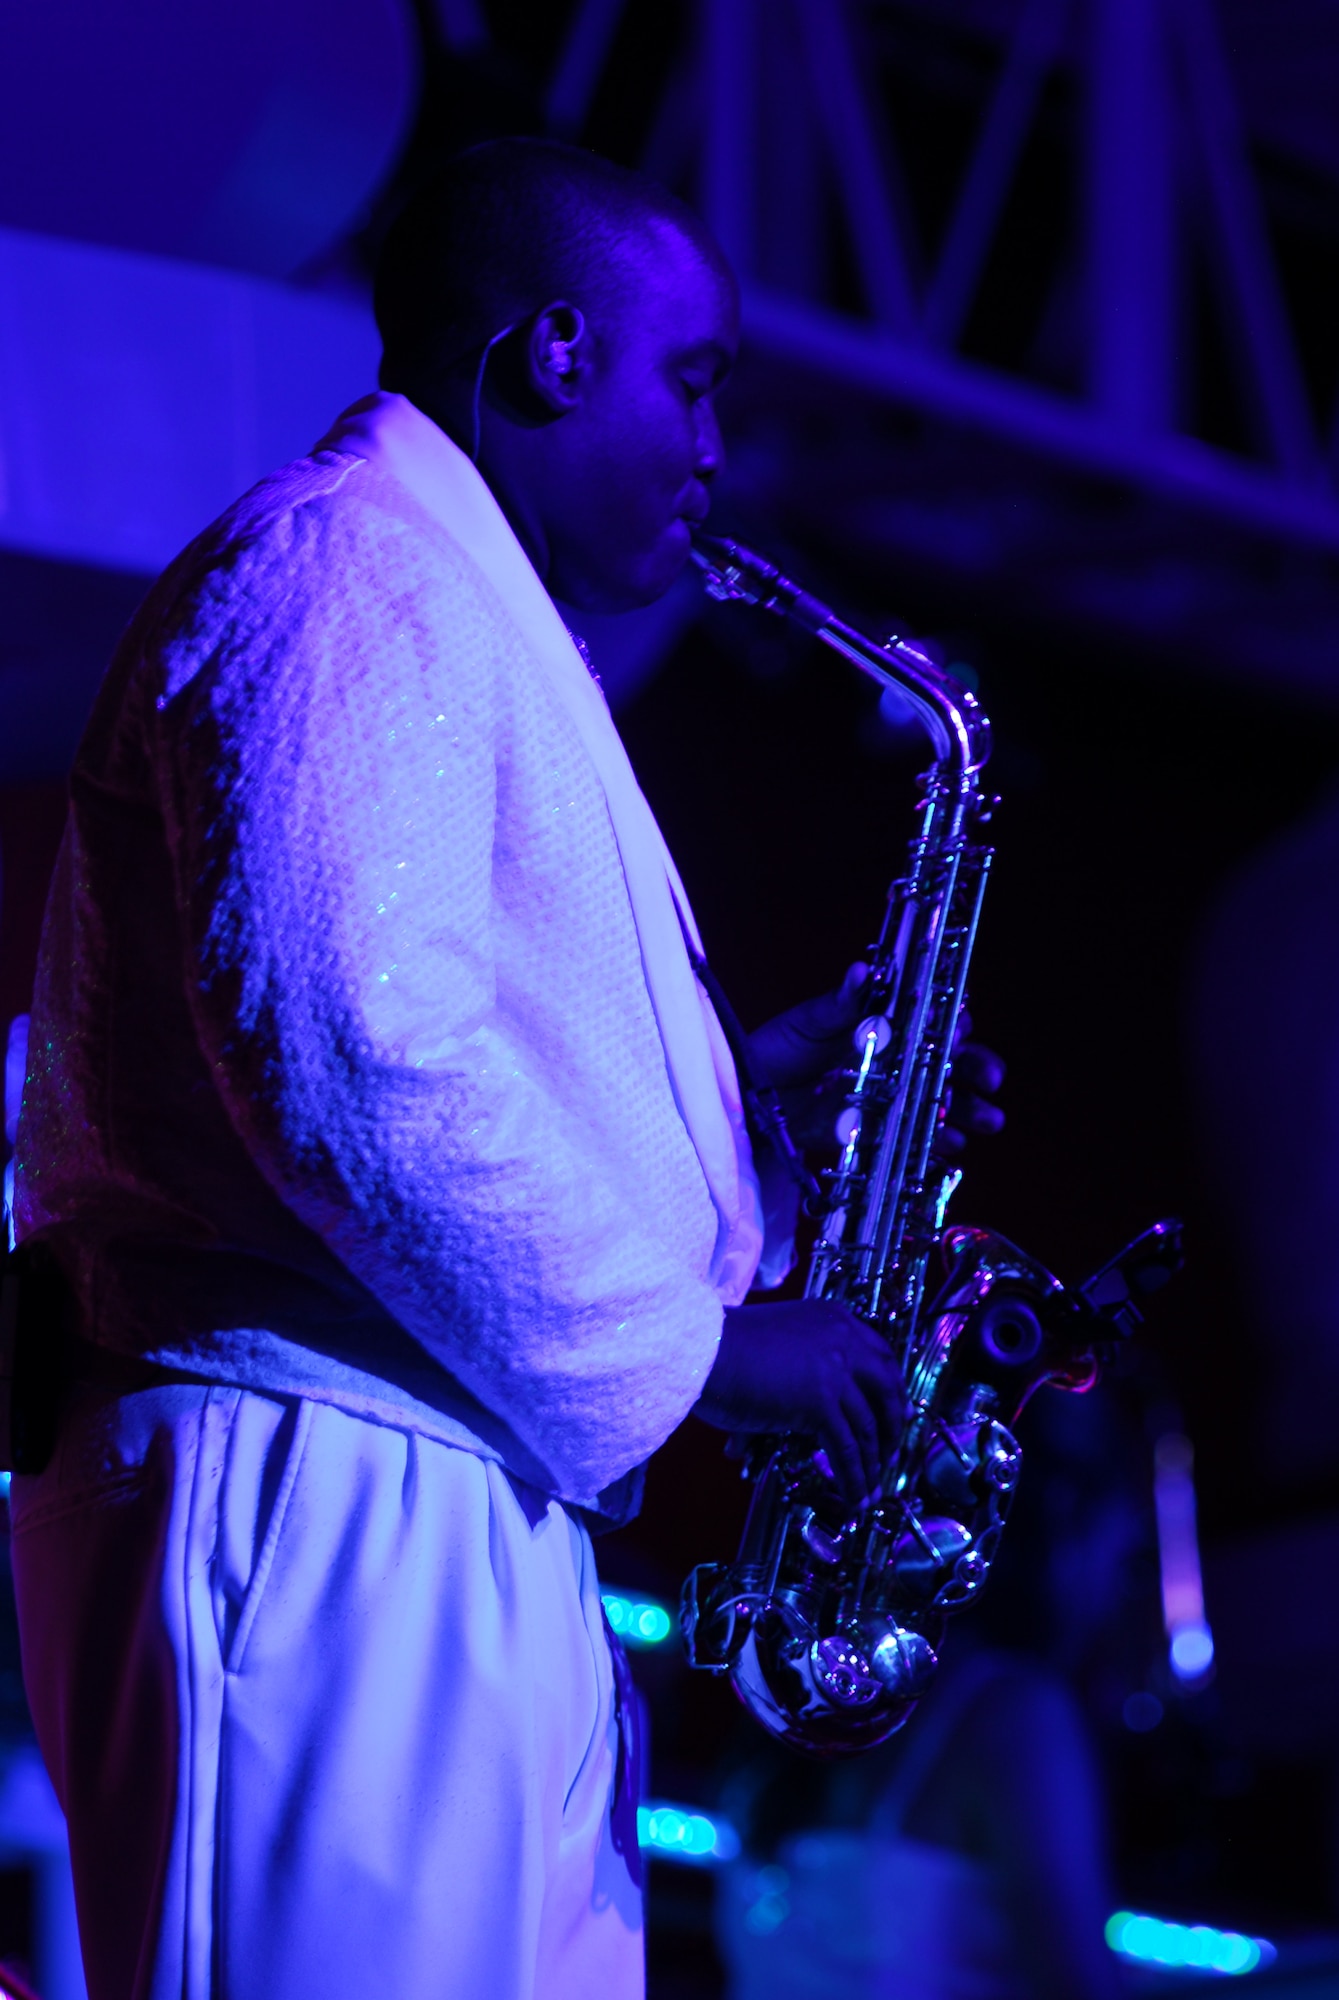 Blowing some cool blues on his alto saxophone during Tops in Blue is Senior Airman Tigh Lewis, 59th Medical Inpatient Squadron, Lackland Air Force Base, Texas. (U.S. Air Force photo by Staff Sgt. Anika Williams)